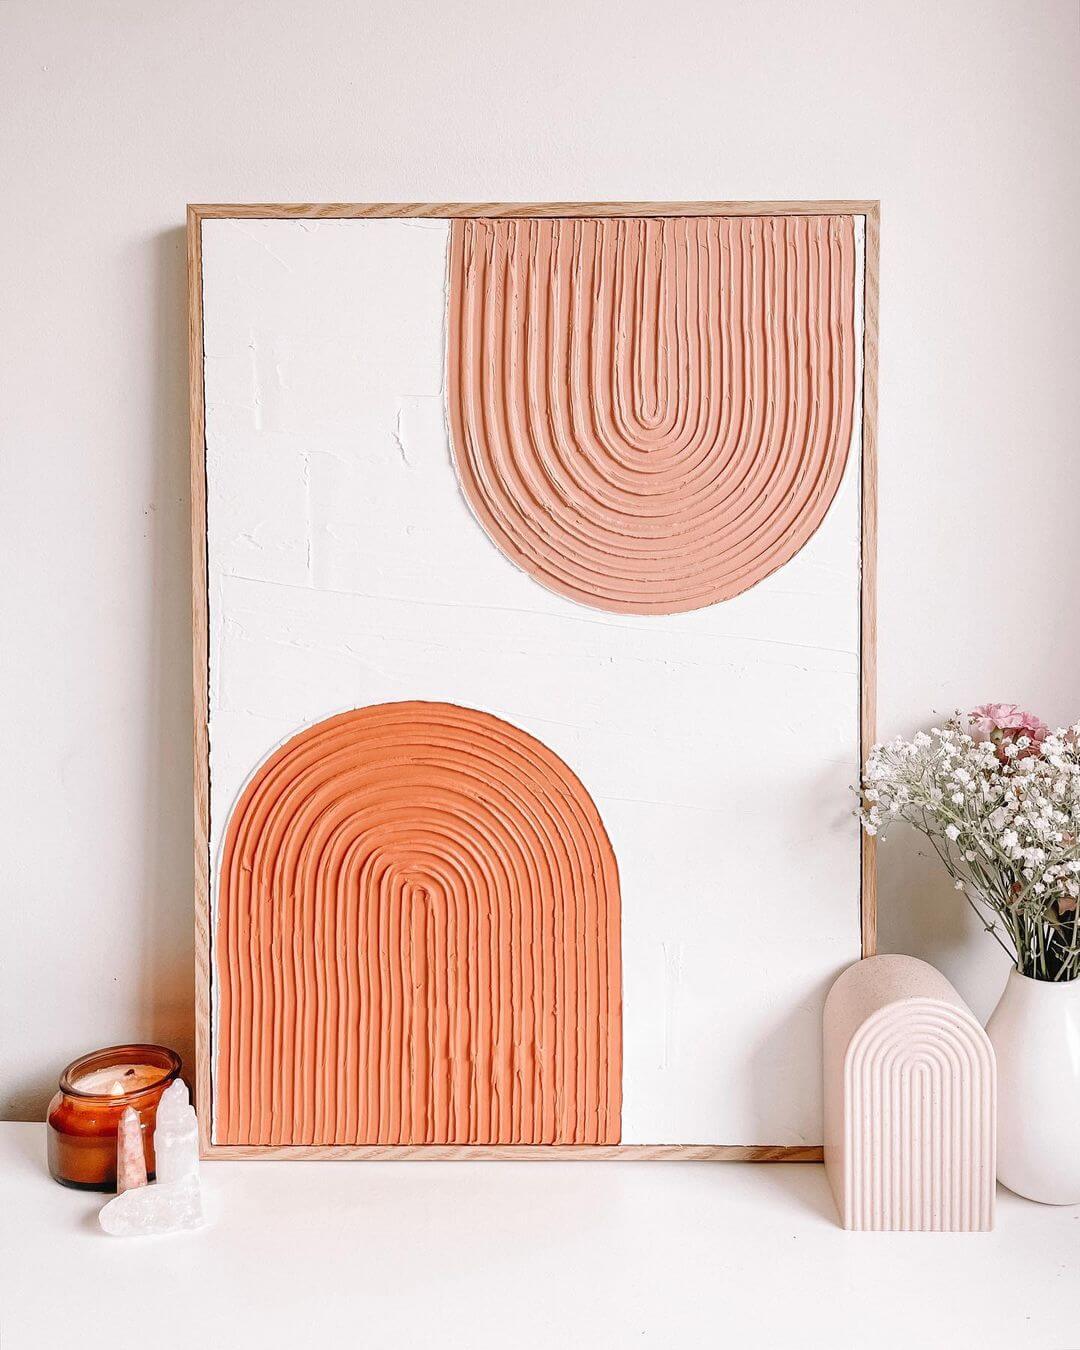 Two geometric arches painted in coral and terracotta next to a vase of dried flowers and a candle.